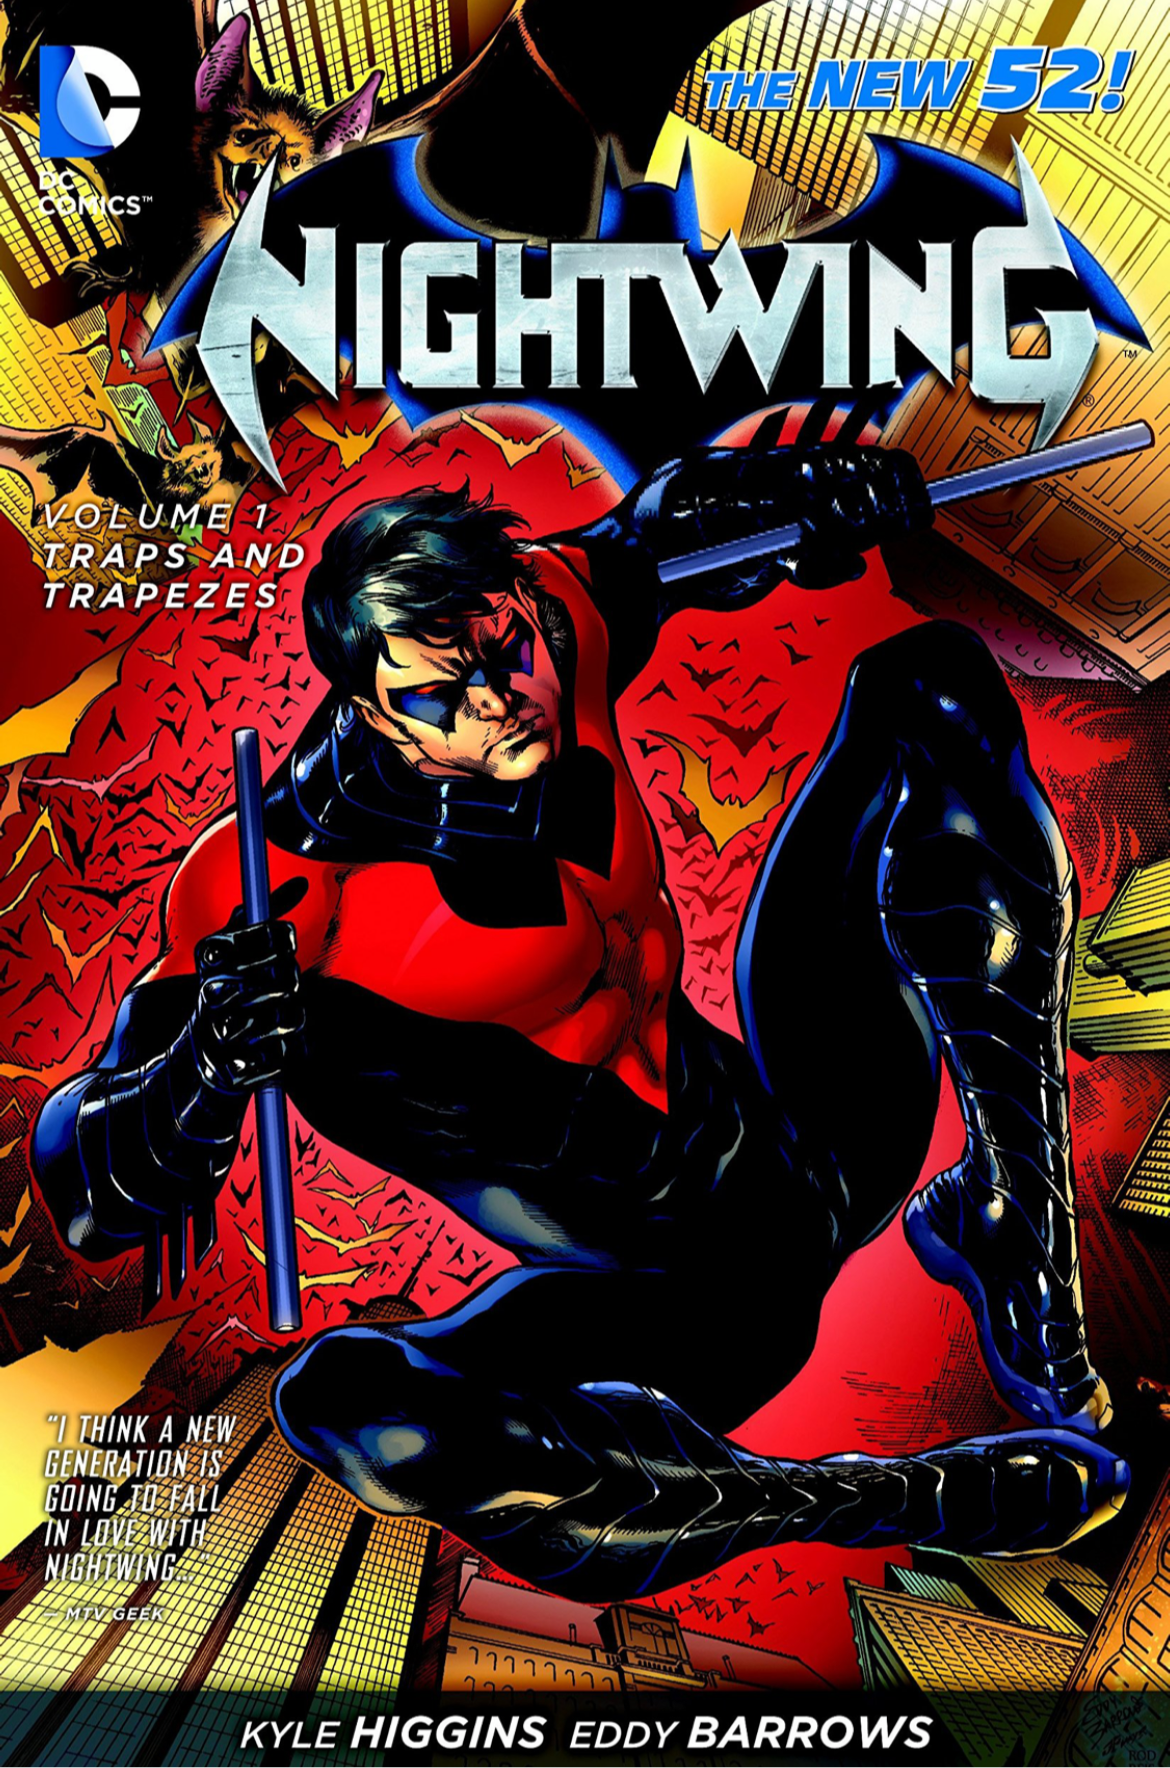 Nightwing (New 52) Vol 1 Traps and Trapezes